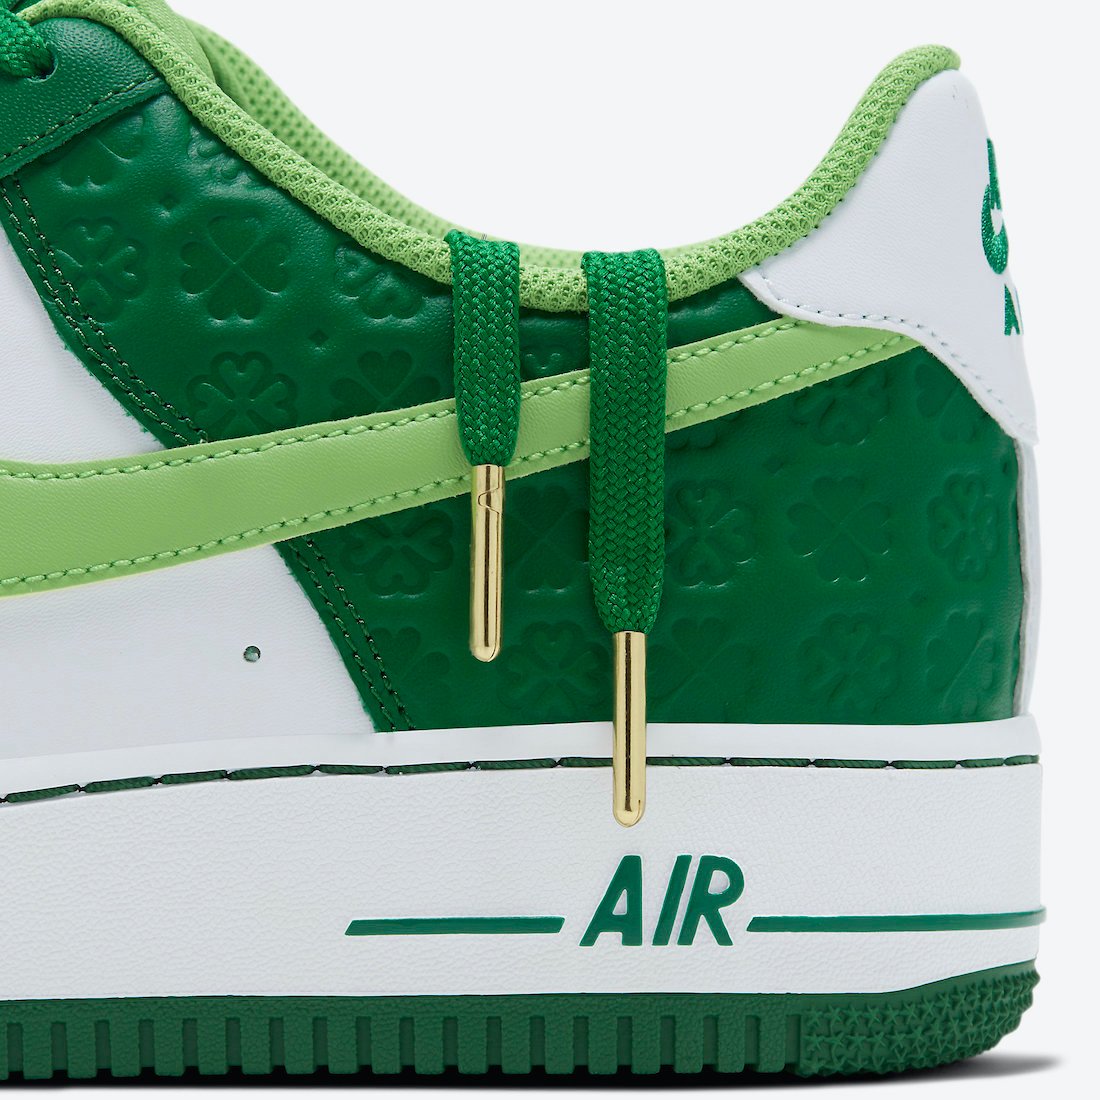 Nike Air Force 1 St. Patricks Day DD8458-300 Release Date Info